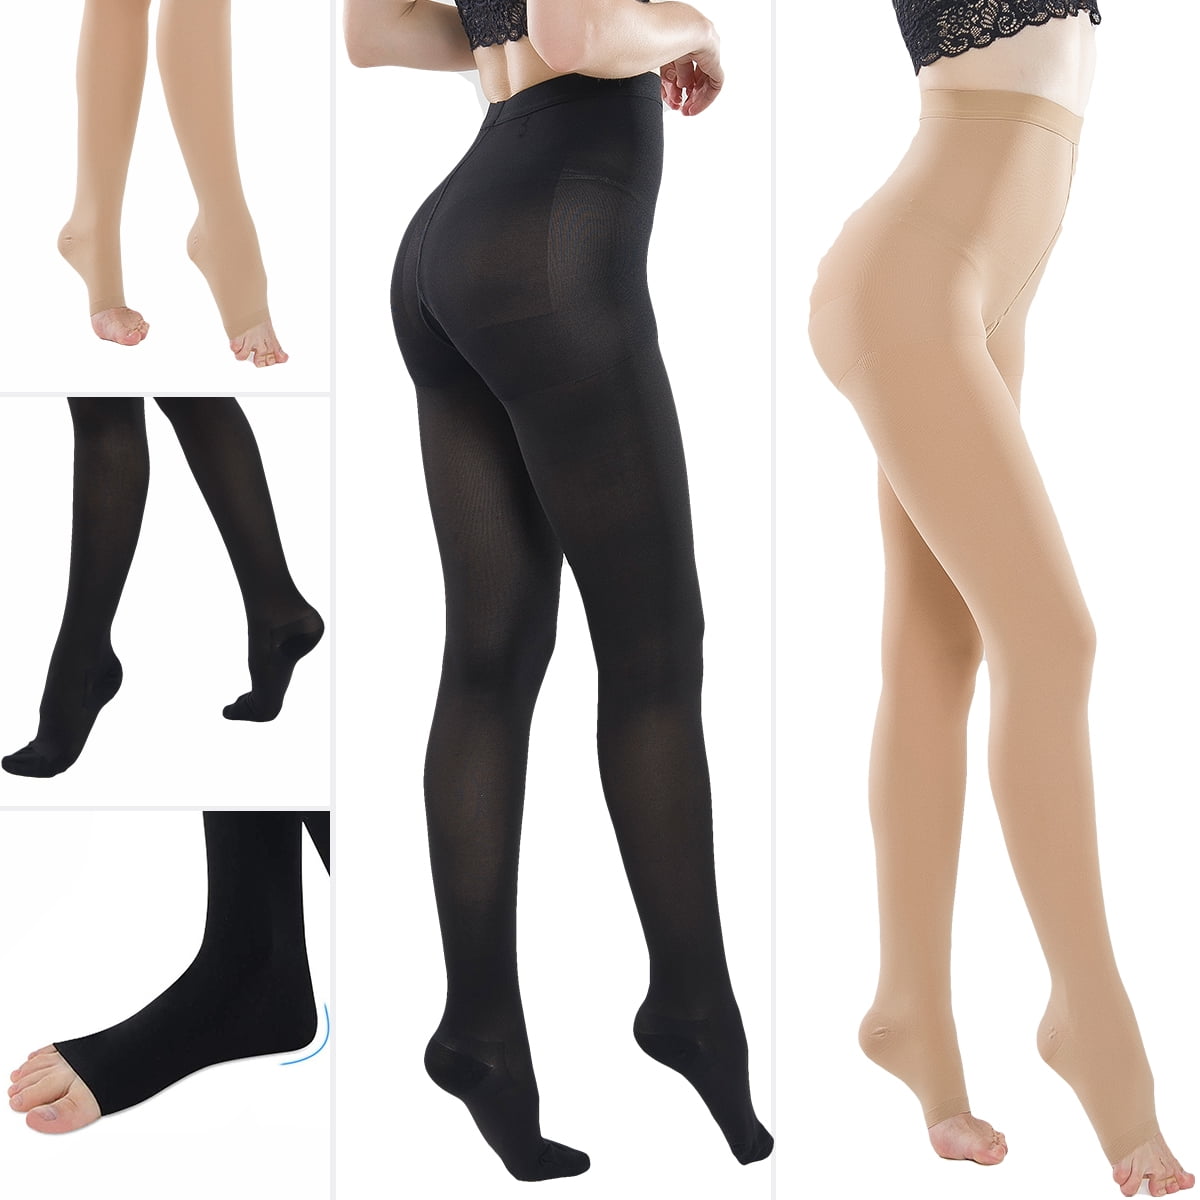 or Compression pantyhose tights